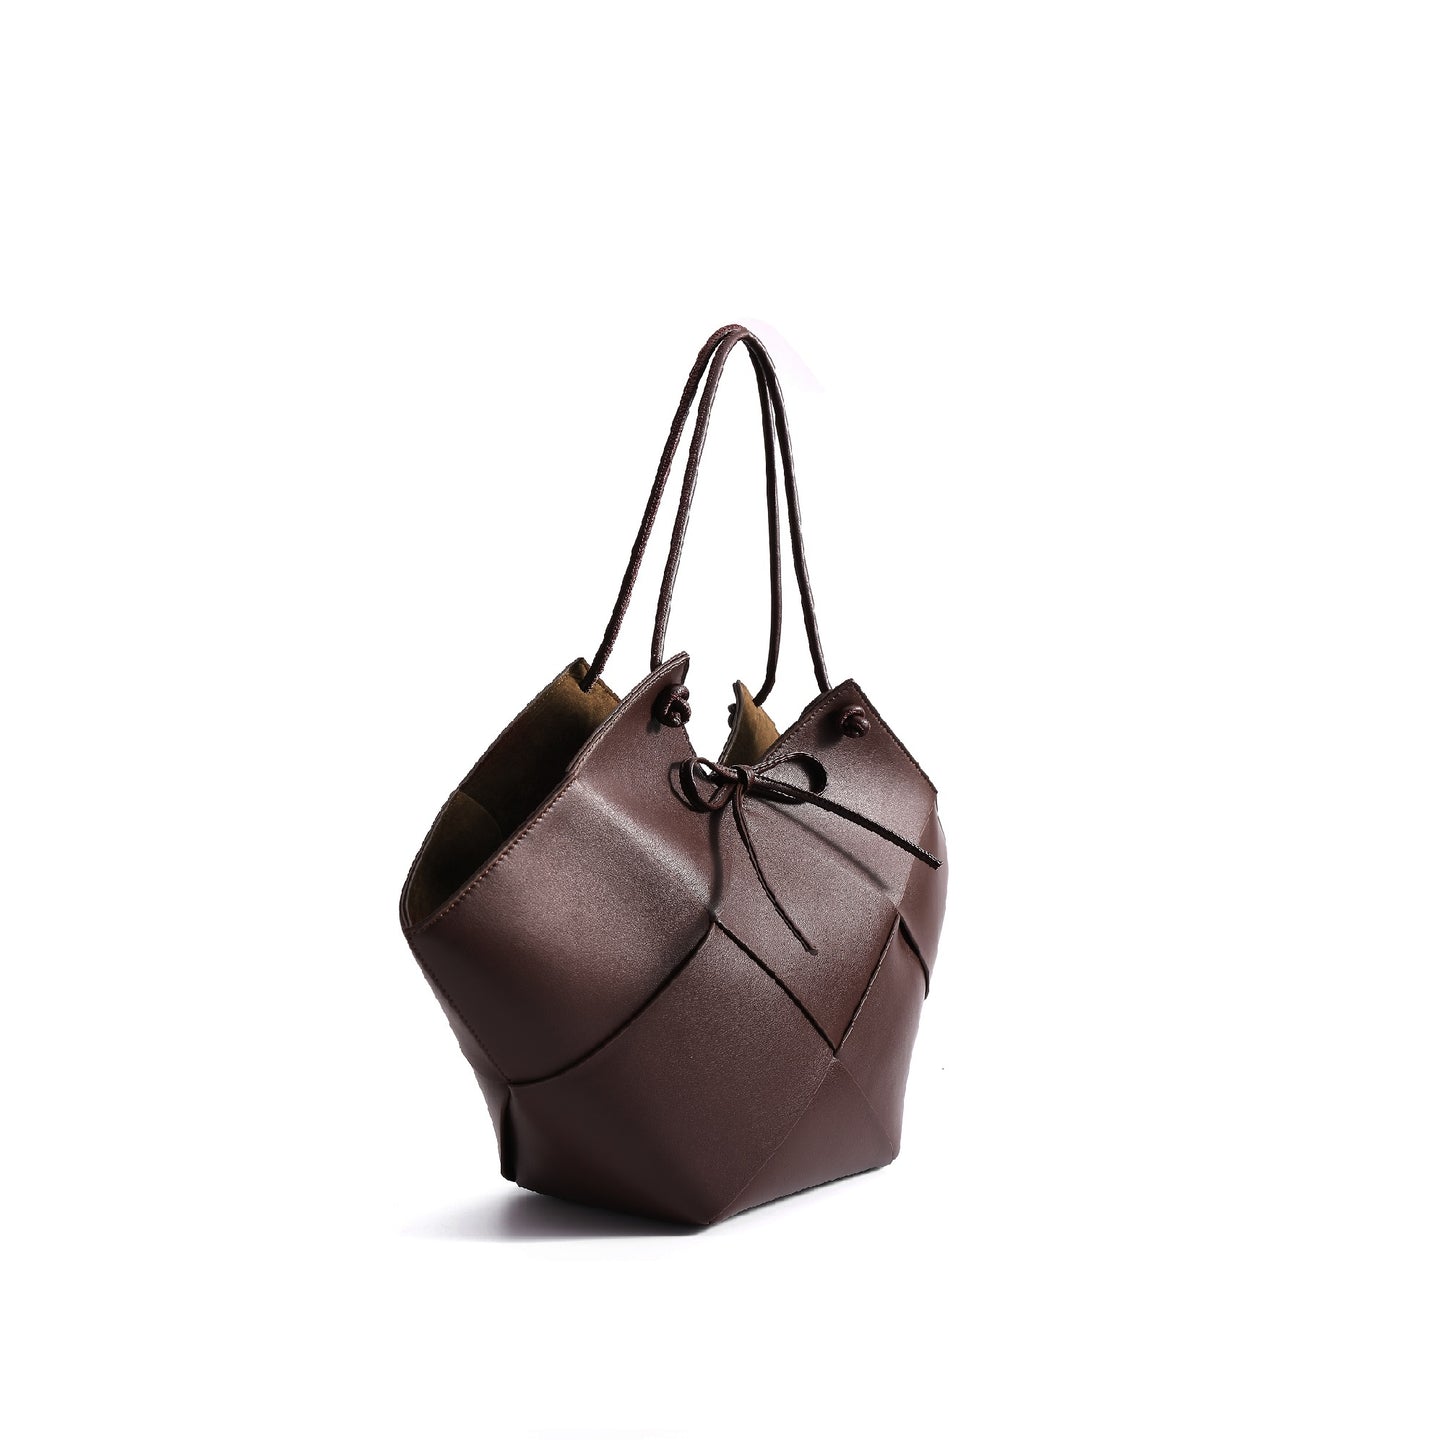 Taylor Contexture Leather Bag, Chocolate(Pre-order, ship on May 15th)